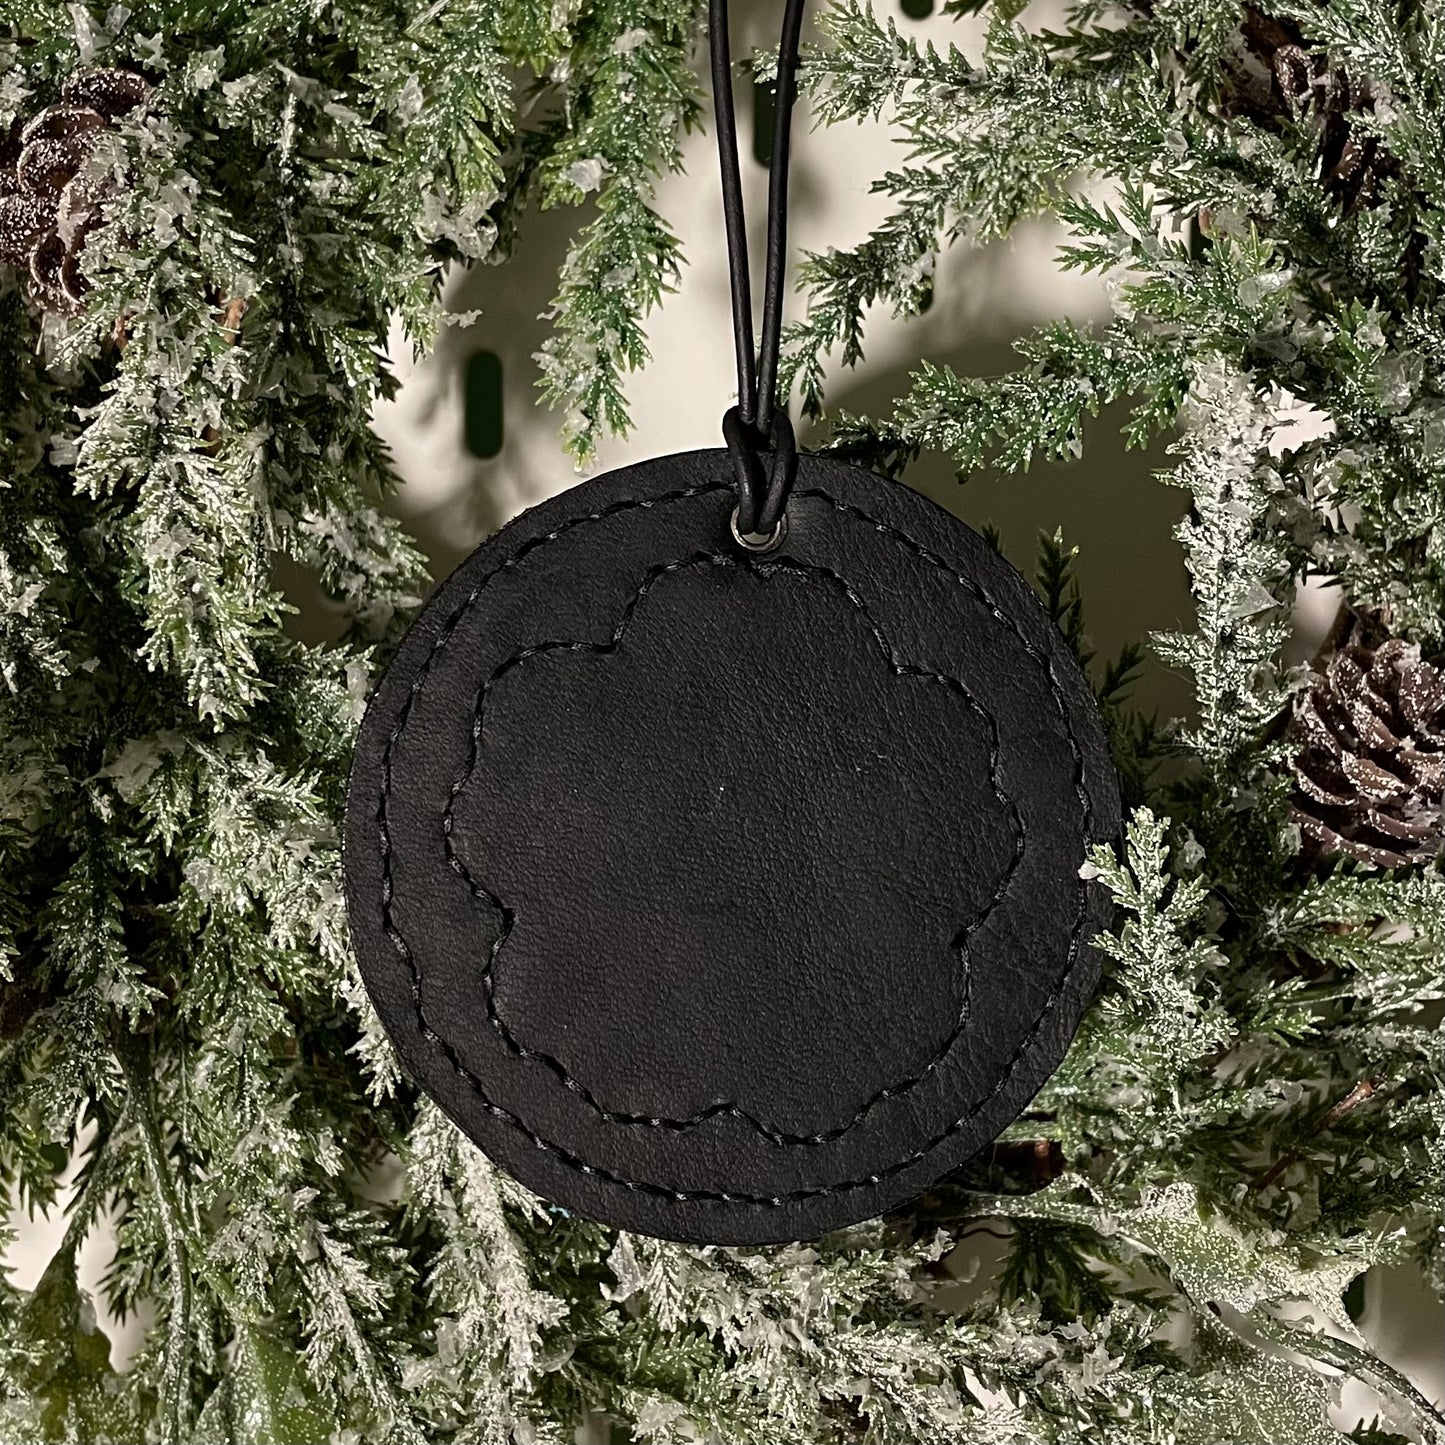 Leather Ornament #29